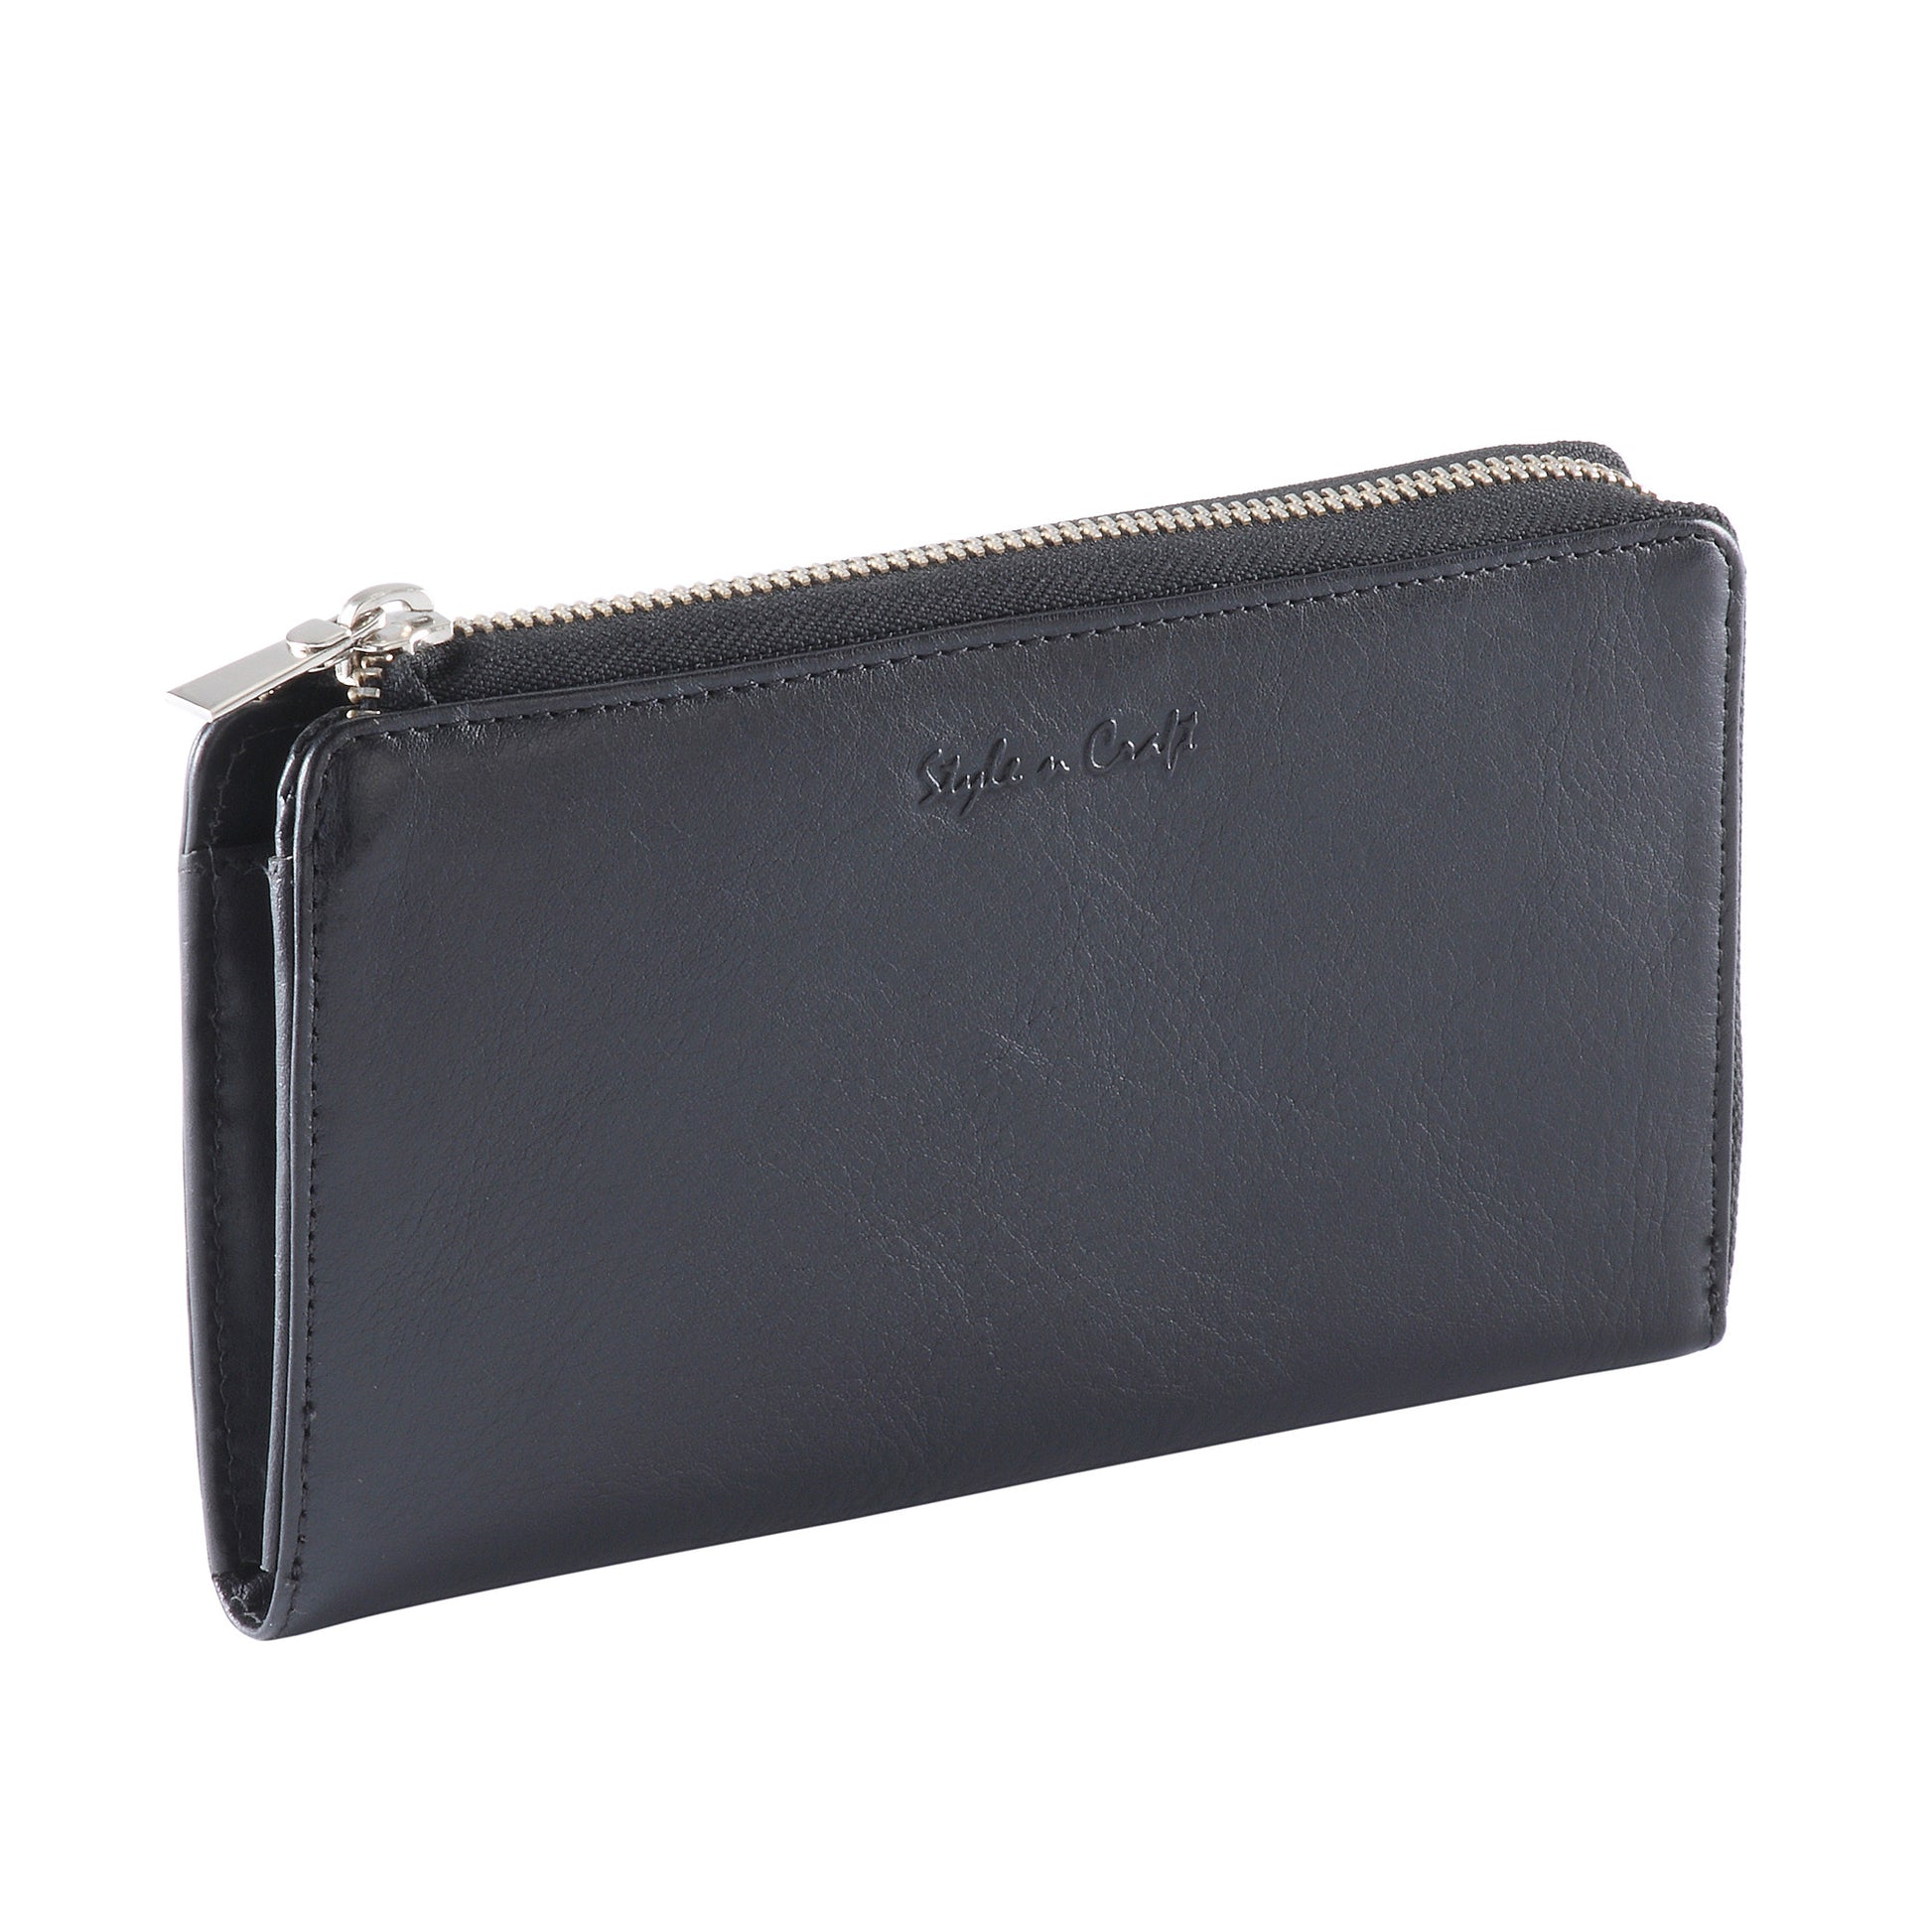 Style n Craft 301966-BL Ladies Zippered Clutch Wallet in Black Leather - front closed